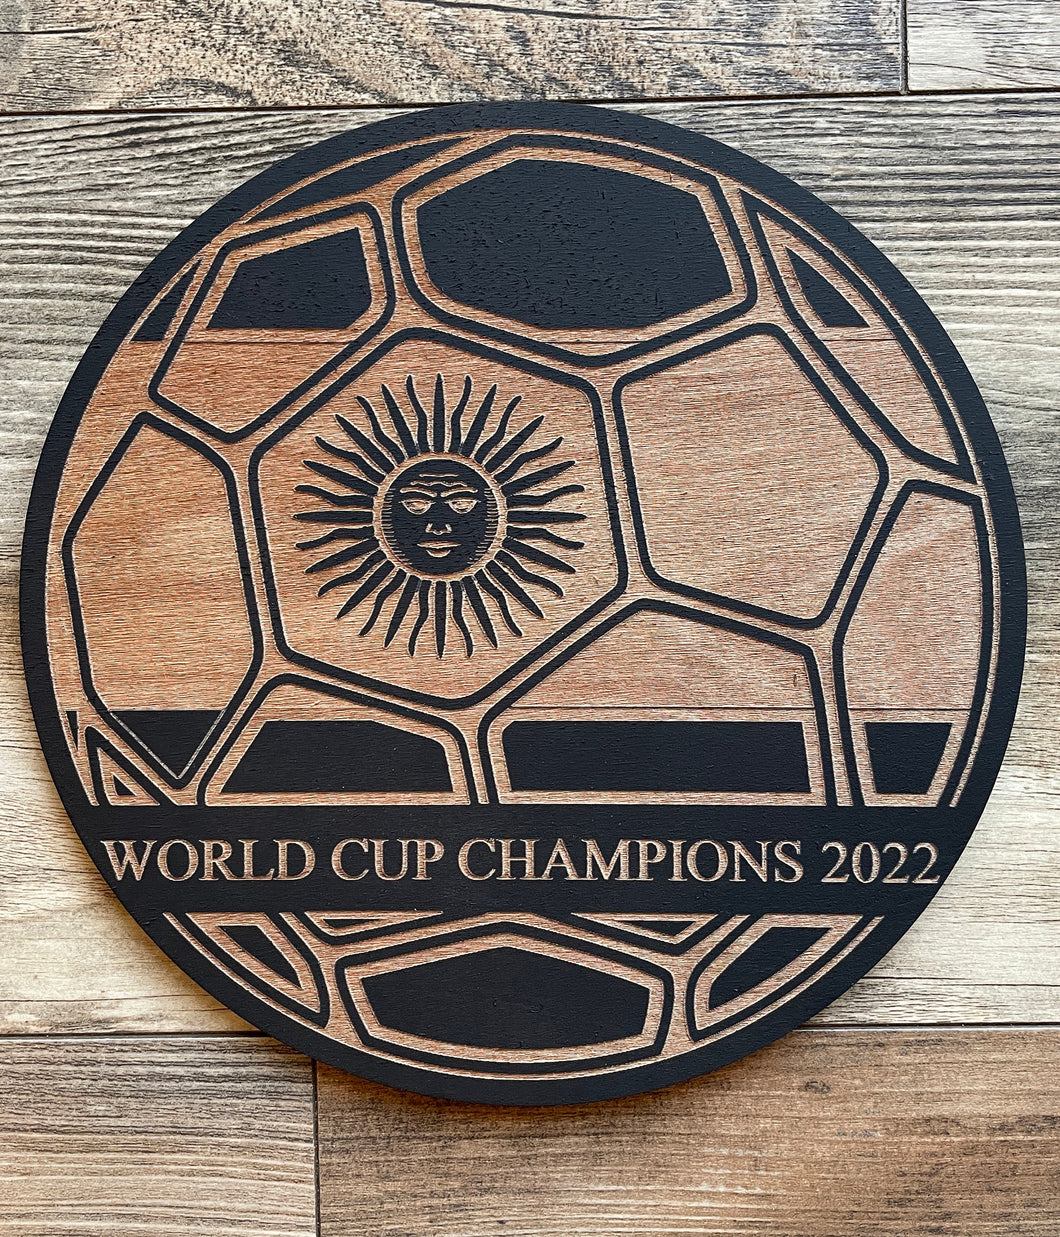 Argentina World Cup 2022 Soccer Wood Flag, World Cup, World Cup Champions, Argentina, FIFA, Soccer, Soccer Ball, Round Sign, Wood Decor